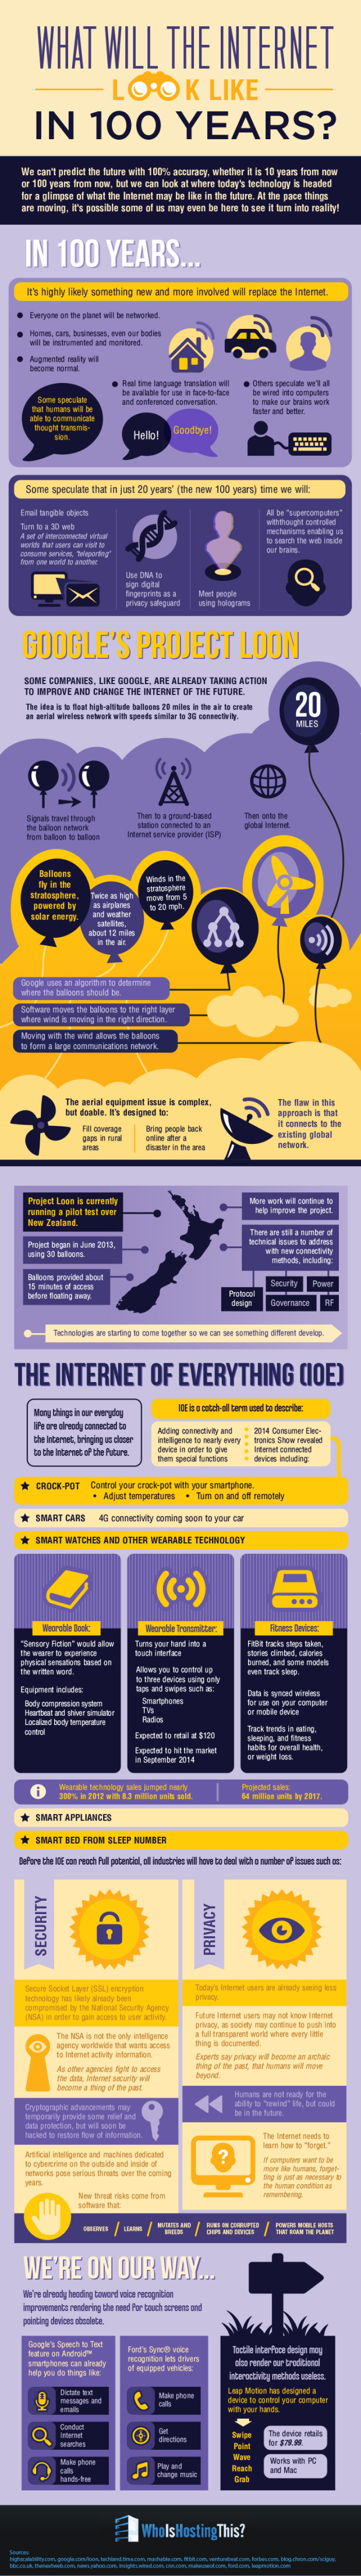 What Will the Internet Look Like in 100 Years? [Infographic]